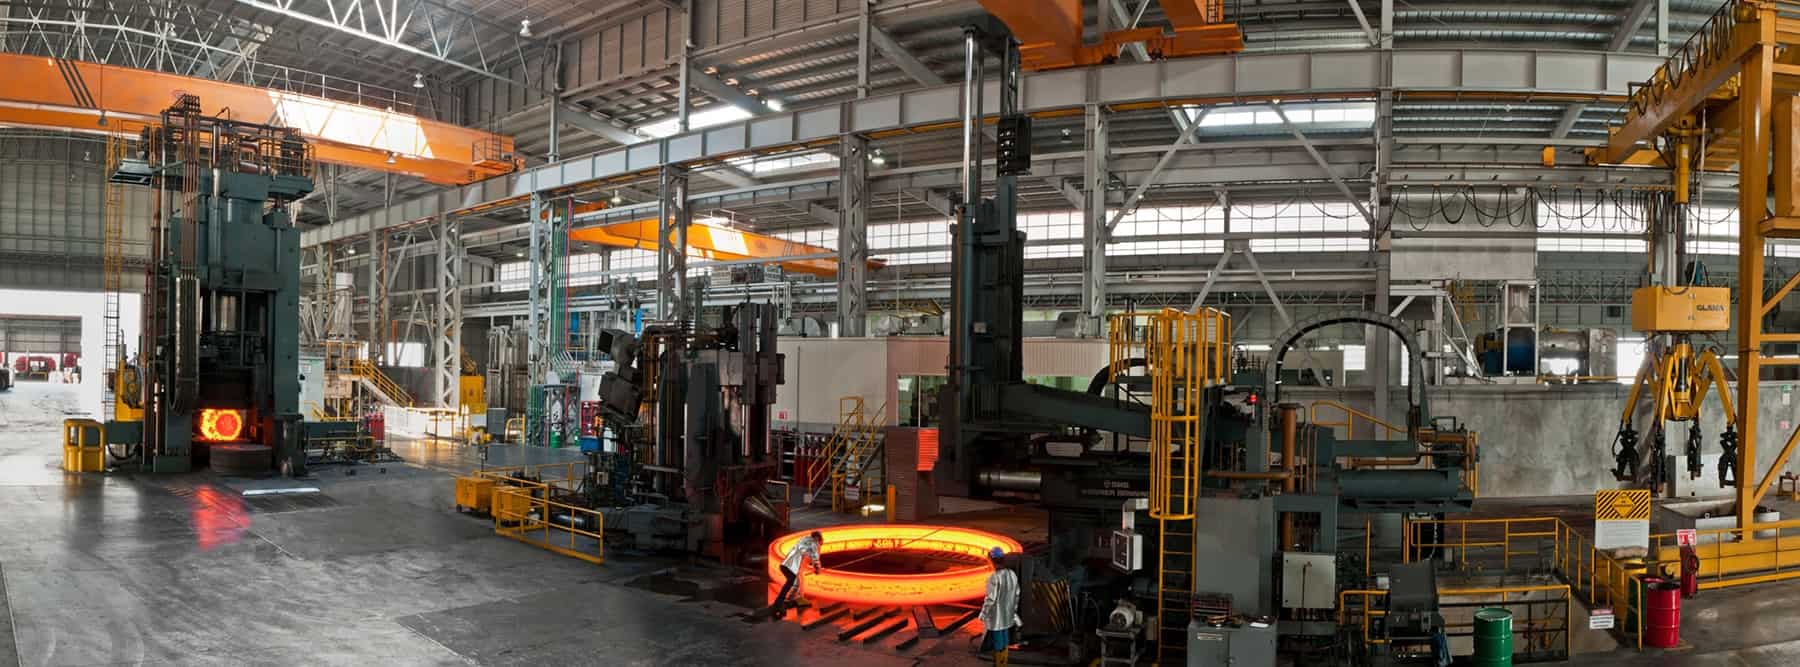 Panorama of an industrial steel foundry with machinery and large glowing hot metal ring, showing busy workflow under high ceiling.